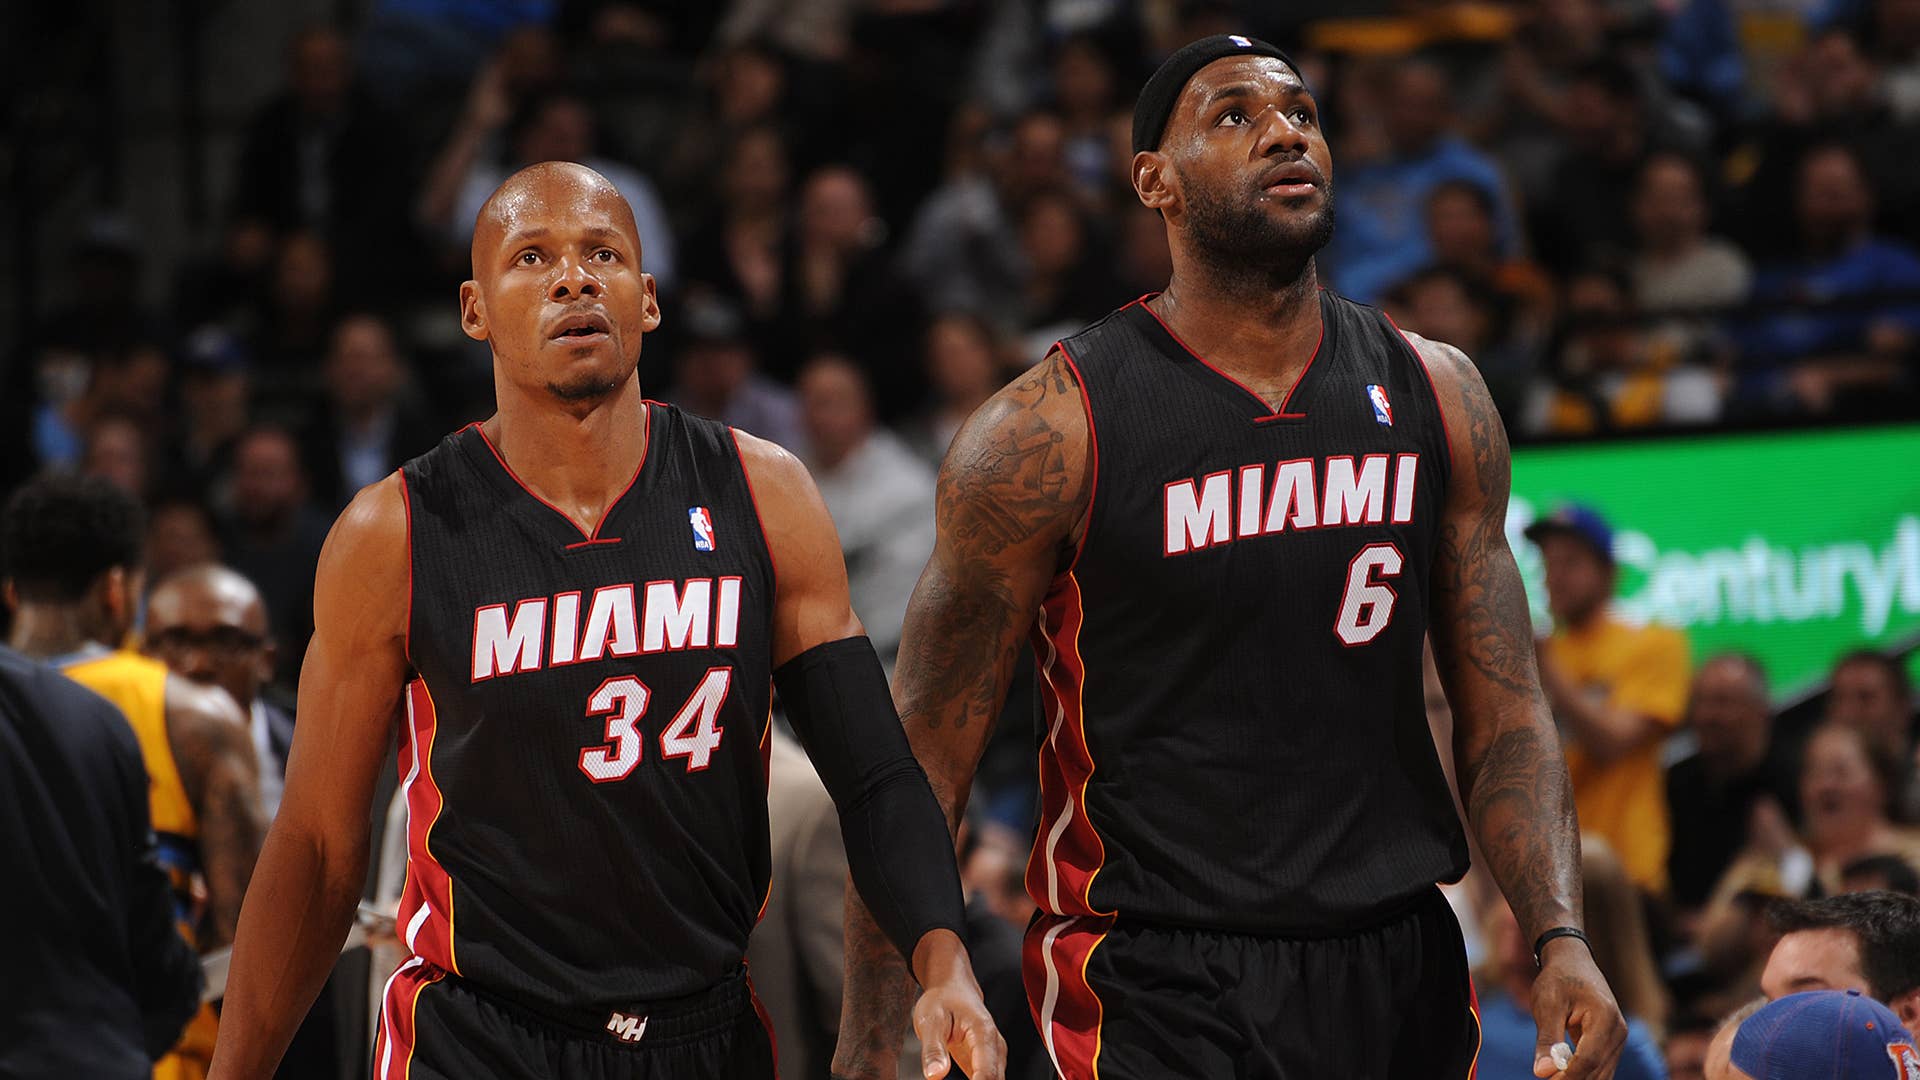 Ray Allen #34 and LeBron James #6 of the Miami Heat look on against the Denver Nuggets